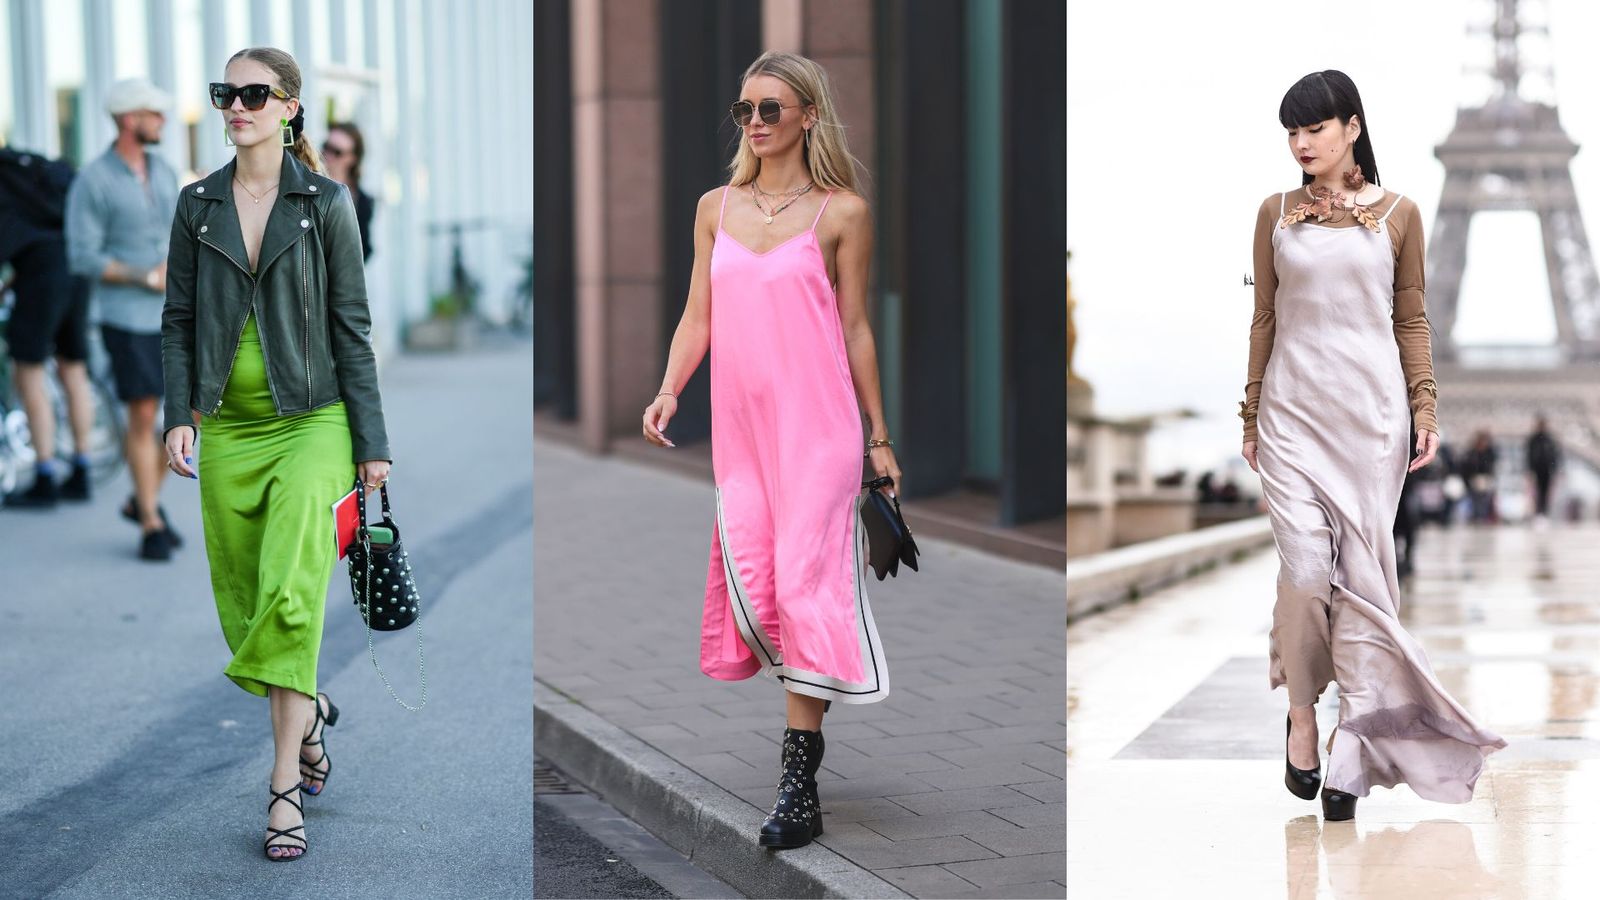 '90s fashion trends are back - here's how to wear them | Woman & Home